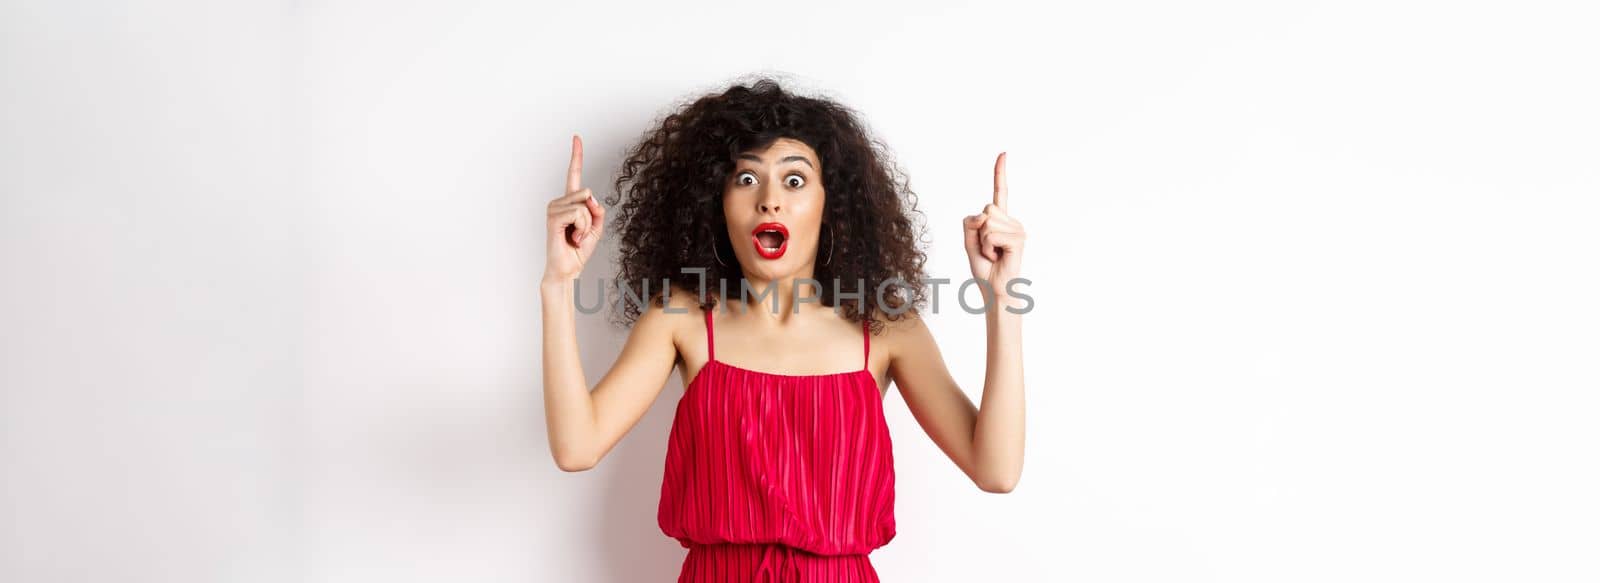 Impressed young woman with curly hair, wearing red dress, gasping and saying wow, pointing fingers up at logo, standing over white background by Benzoix